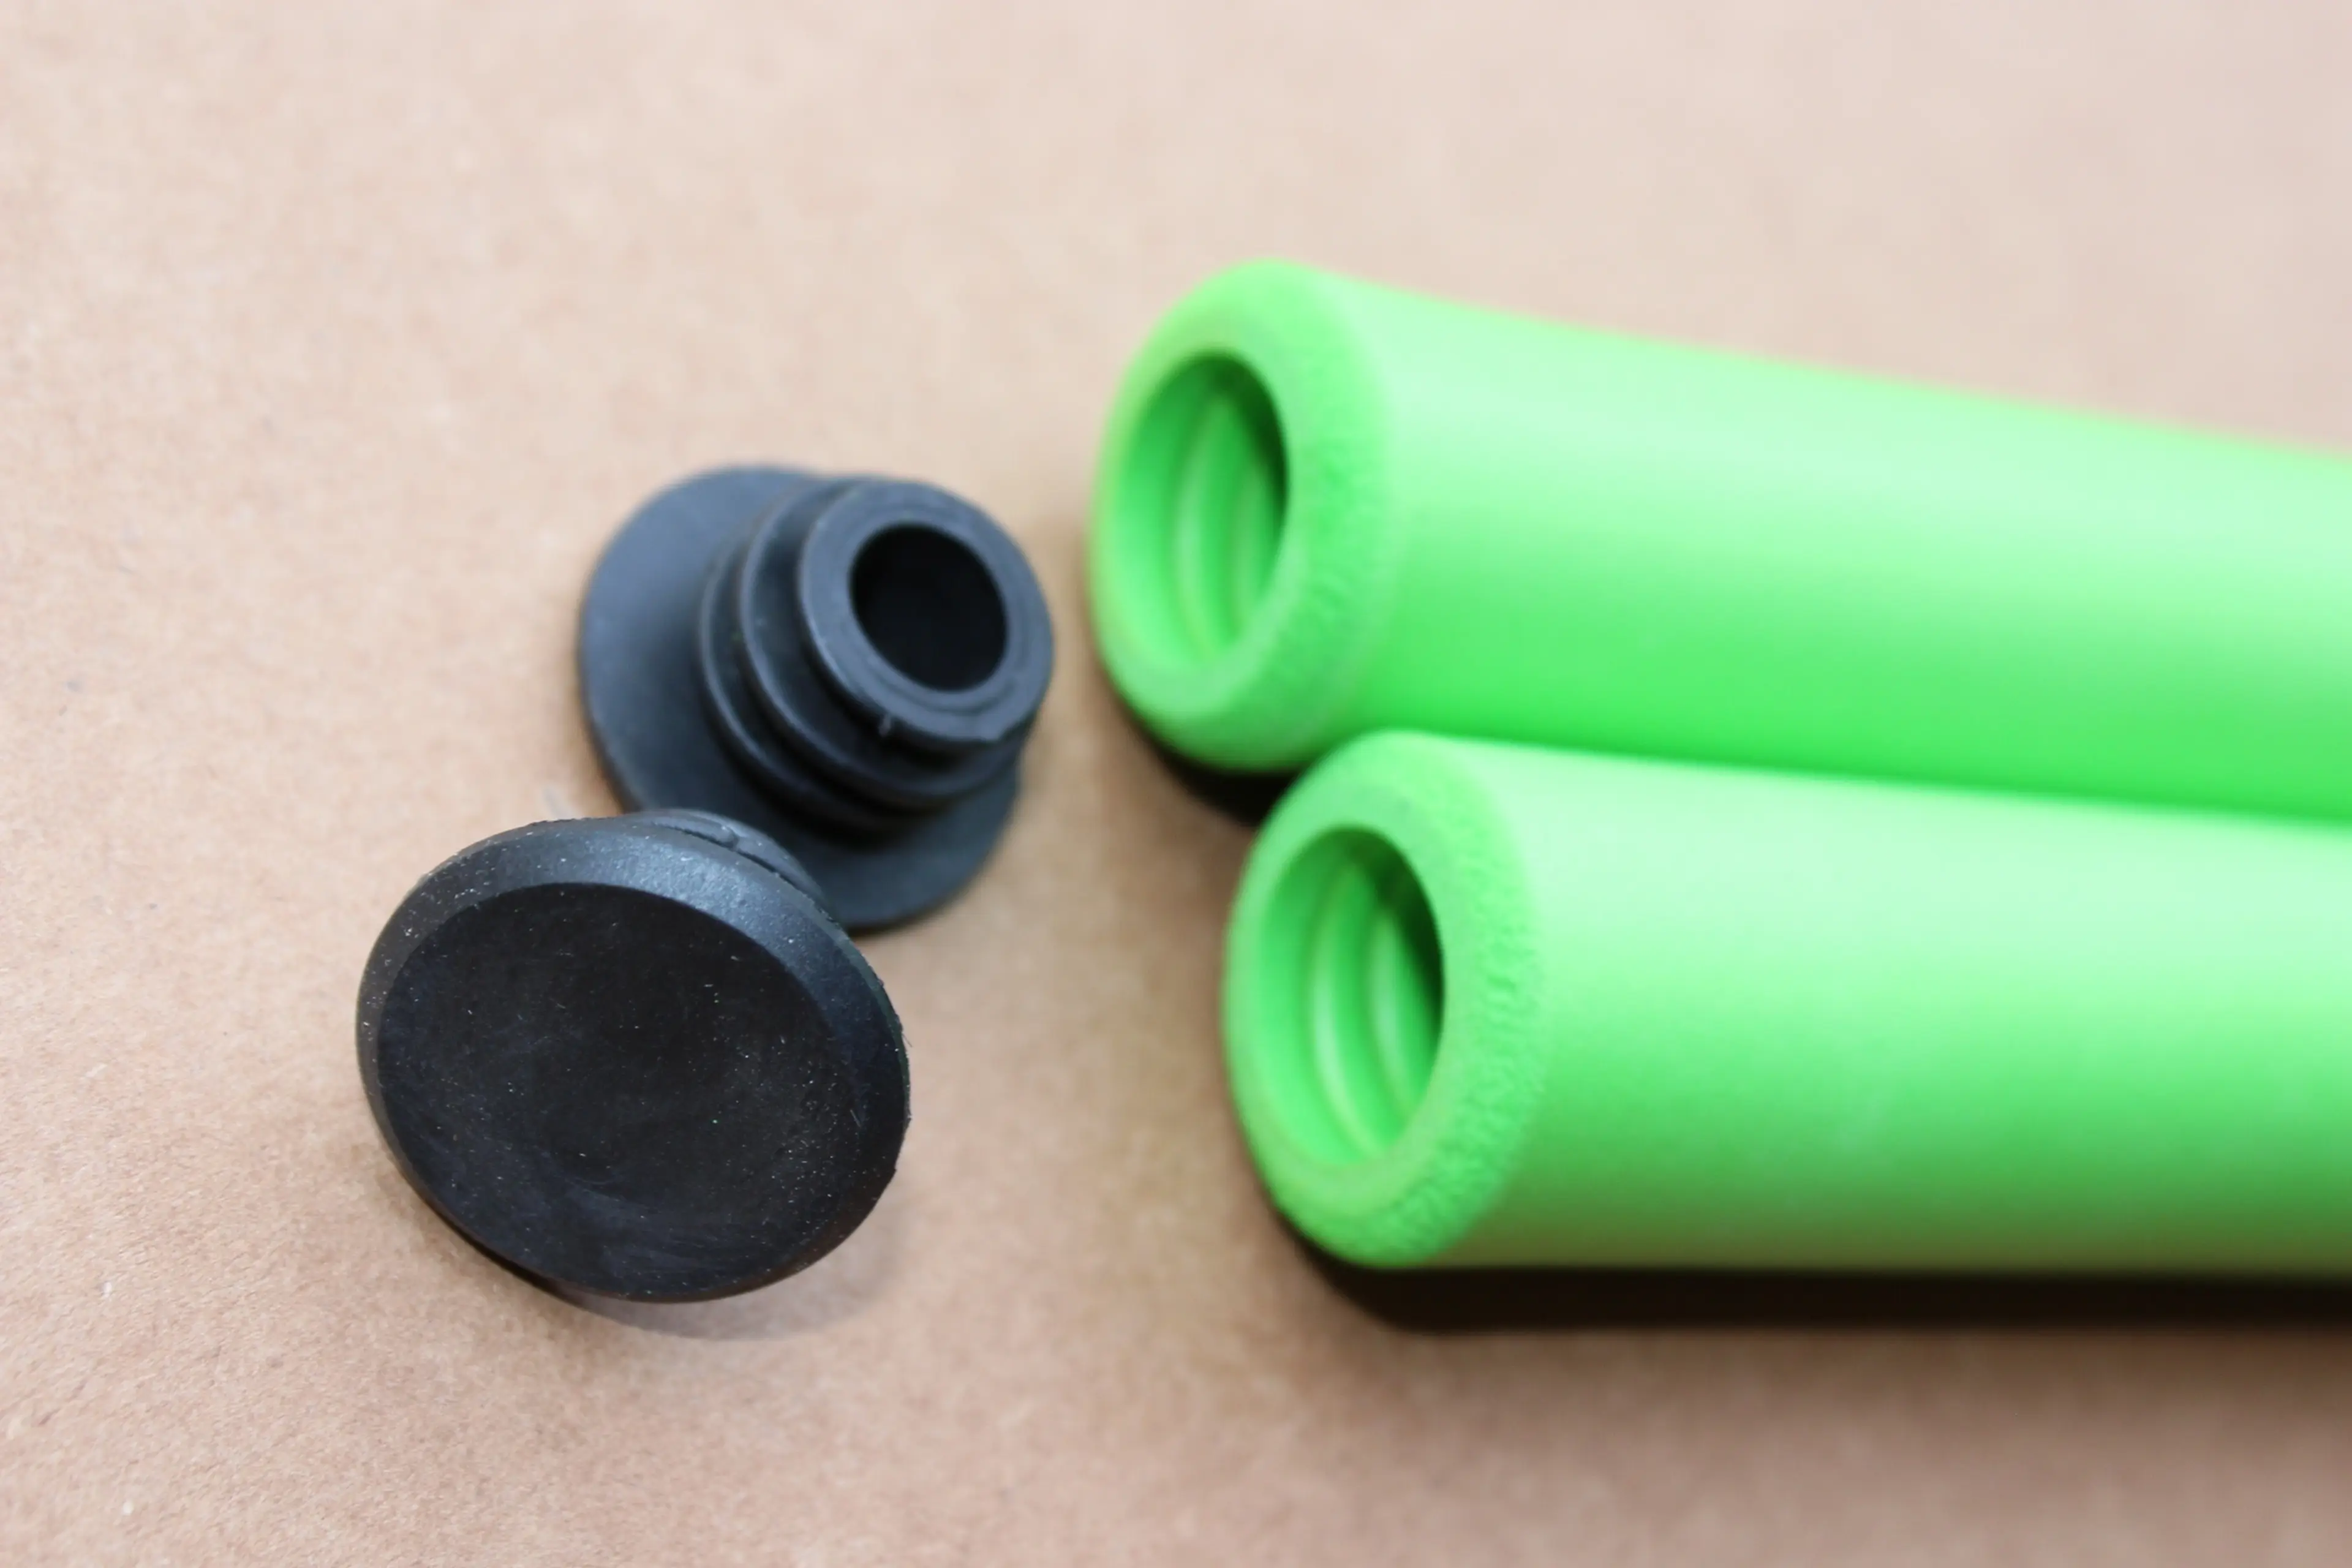 2. Silicone Racing Grips - verde